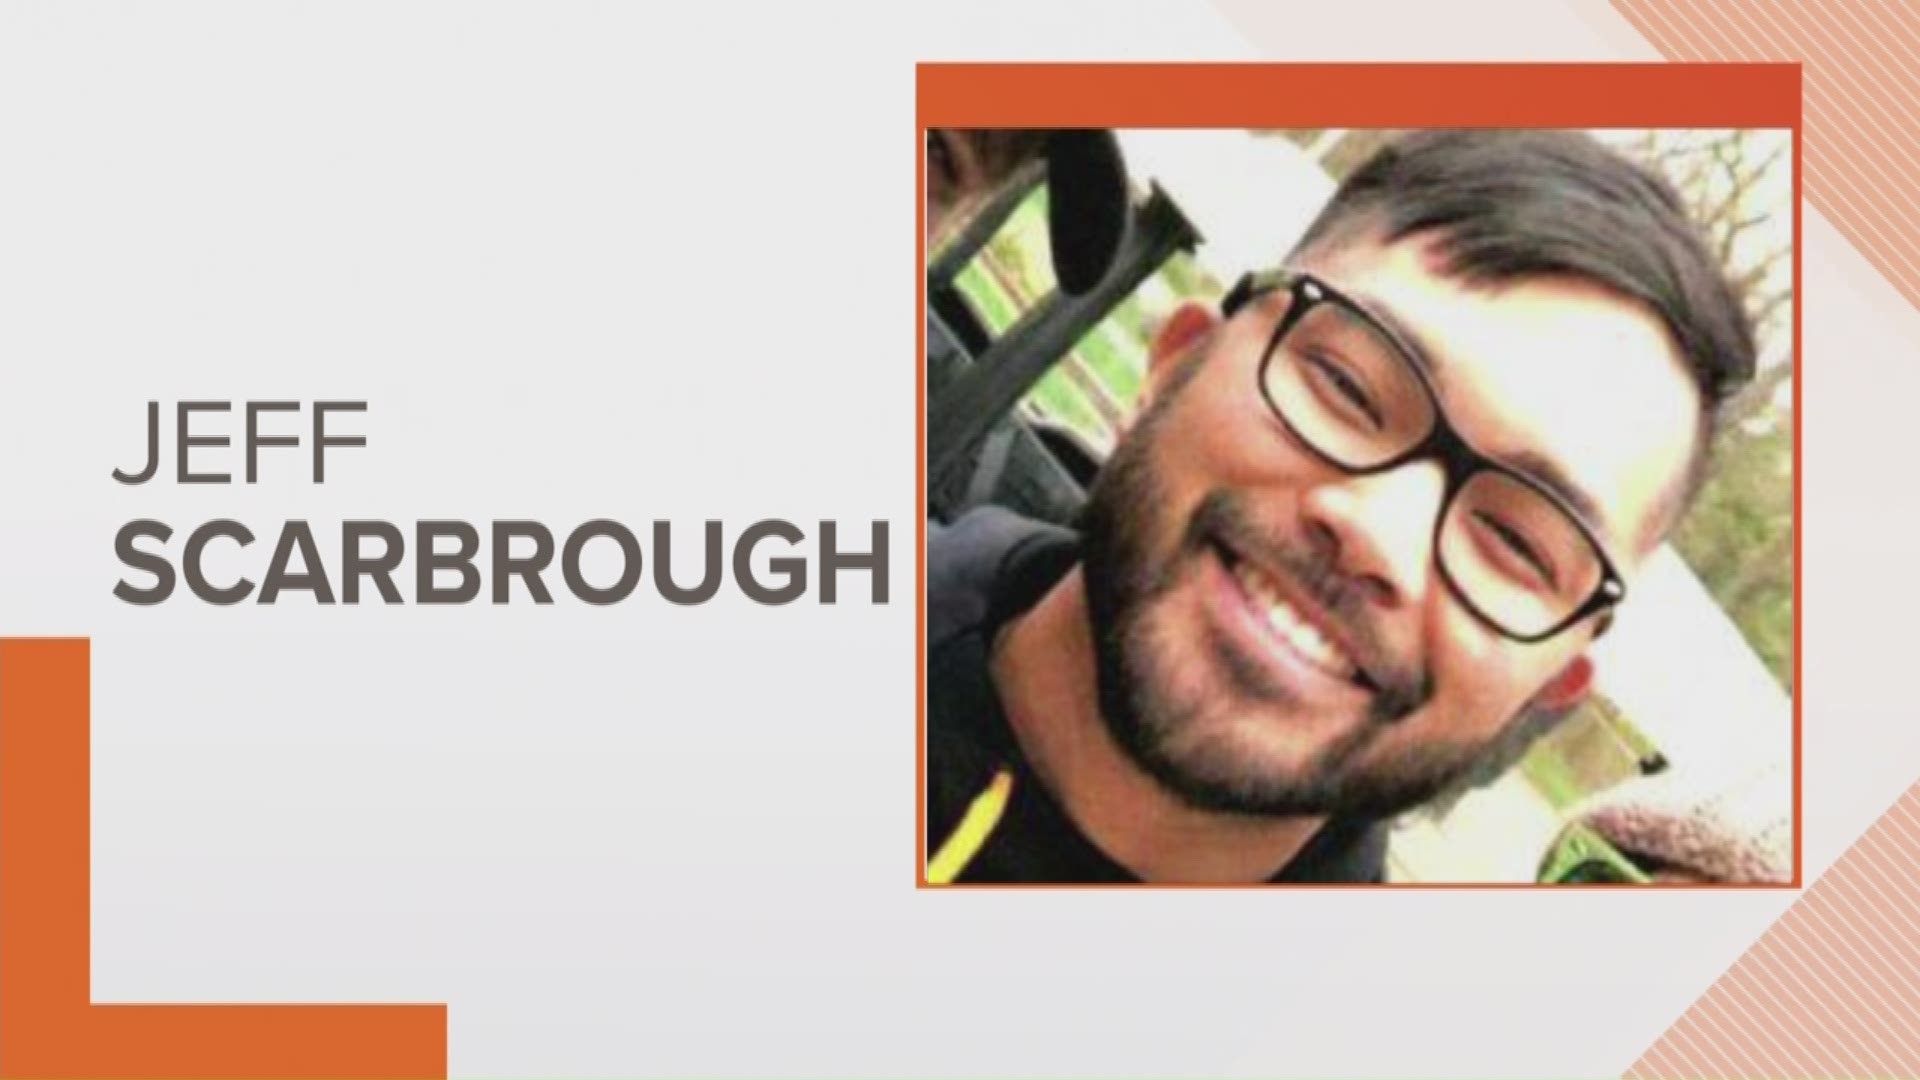 Jeff Scarbrough was last seen Saturday, May 11, in Muskegon.